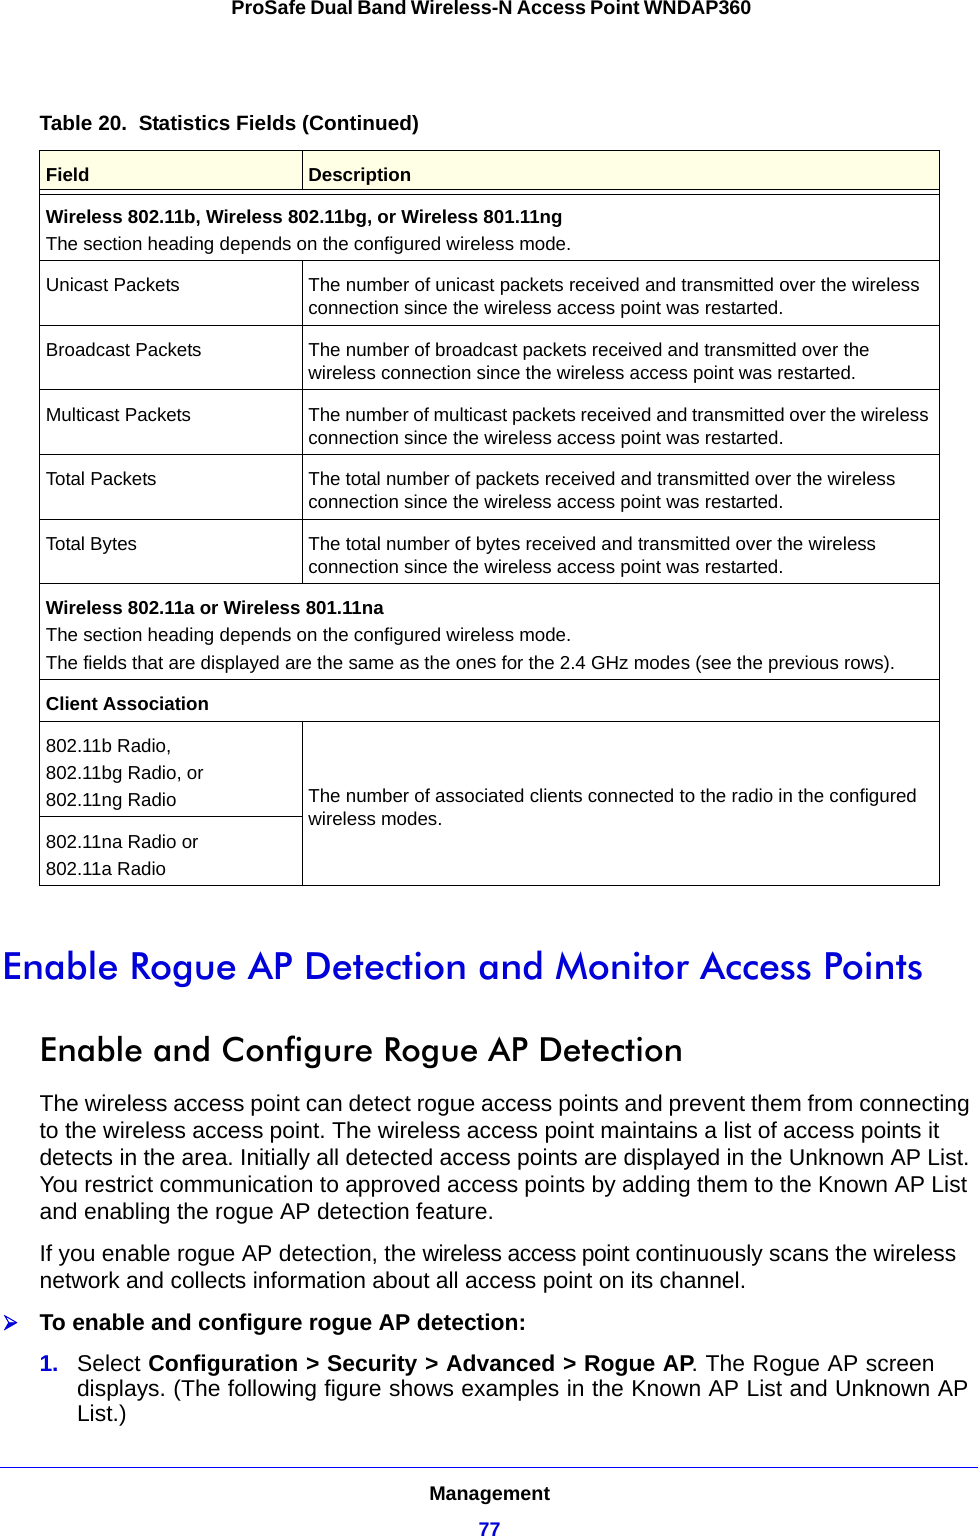 Management77 ProSafe Dual Band Wireless-N Access Point WNDAP360Enable Rogue AP Detection and Monitor Access PointsEnable and Configure Rogue AP DetectionThe wireless access point can detect rogue access points and prevent them from connecting to the wireless access point. The wireless access point maintains a list of access points it detects in the area. Initially all detected access points are displayed in the Unknown AP List. You restrict communication to approved access points by adding them to the Known AP List and enabling the rogue AP detection feature.If you enable rogue AP detection, the wireless access point continuously scans the wireless network and collects information about all access point on its channel.To enable and configure rogue AP detection:1.  Select Configuration &gt; Security &gt; Advanced &gt; Rogue AP. The Rogue AP screen displays. (The following figure shows examples in the Known AP List and Unknown AP List.)Wireless 802.11b, Wireless 802.11bg, or Wireless 801.11ngThe section heading depends on the configured wireless mode.Unicast Packets The number of unicast packets received and transmitted over the wireless connection since the wireless access point was restarted.Broadcast Packets The number of broadcast packets received and transmitted over the wireless connection since the wireless access point was restarted.Multicast Packets The number of multicast packets received and transmitted over the wireless connection since the wireless access point was restarted.Total Packets The total number of packets received and transmitted over the wireless connection since the wireless access point was restarted.Total Bytes The total number of bytes received and transmitted over the wireless connection since the wireless access point was restarted.Wireless 802.11a or Wireless 801.11naThe section heading depends on the configured wireless mode.The fields that are displayed are the same as the ones for the 2.4 GHz modes (see the previous rows).Client Association802.11b Radio,802.11bg Radio, or802.11ng Radio The number of associated clients connected to the radio in the configured wireless modes.802.11na Radio or802.11a RadioTable 20.  Statistics Fields (Continued)Field  Description